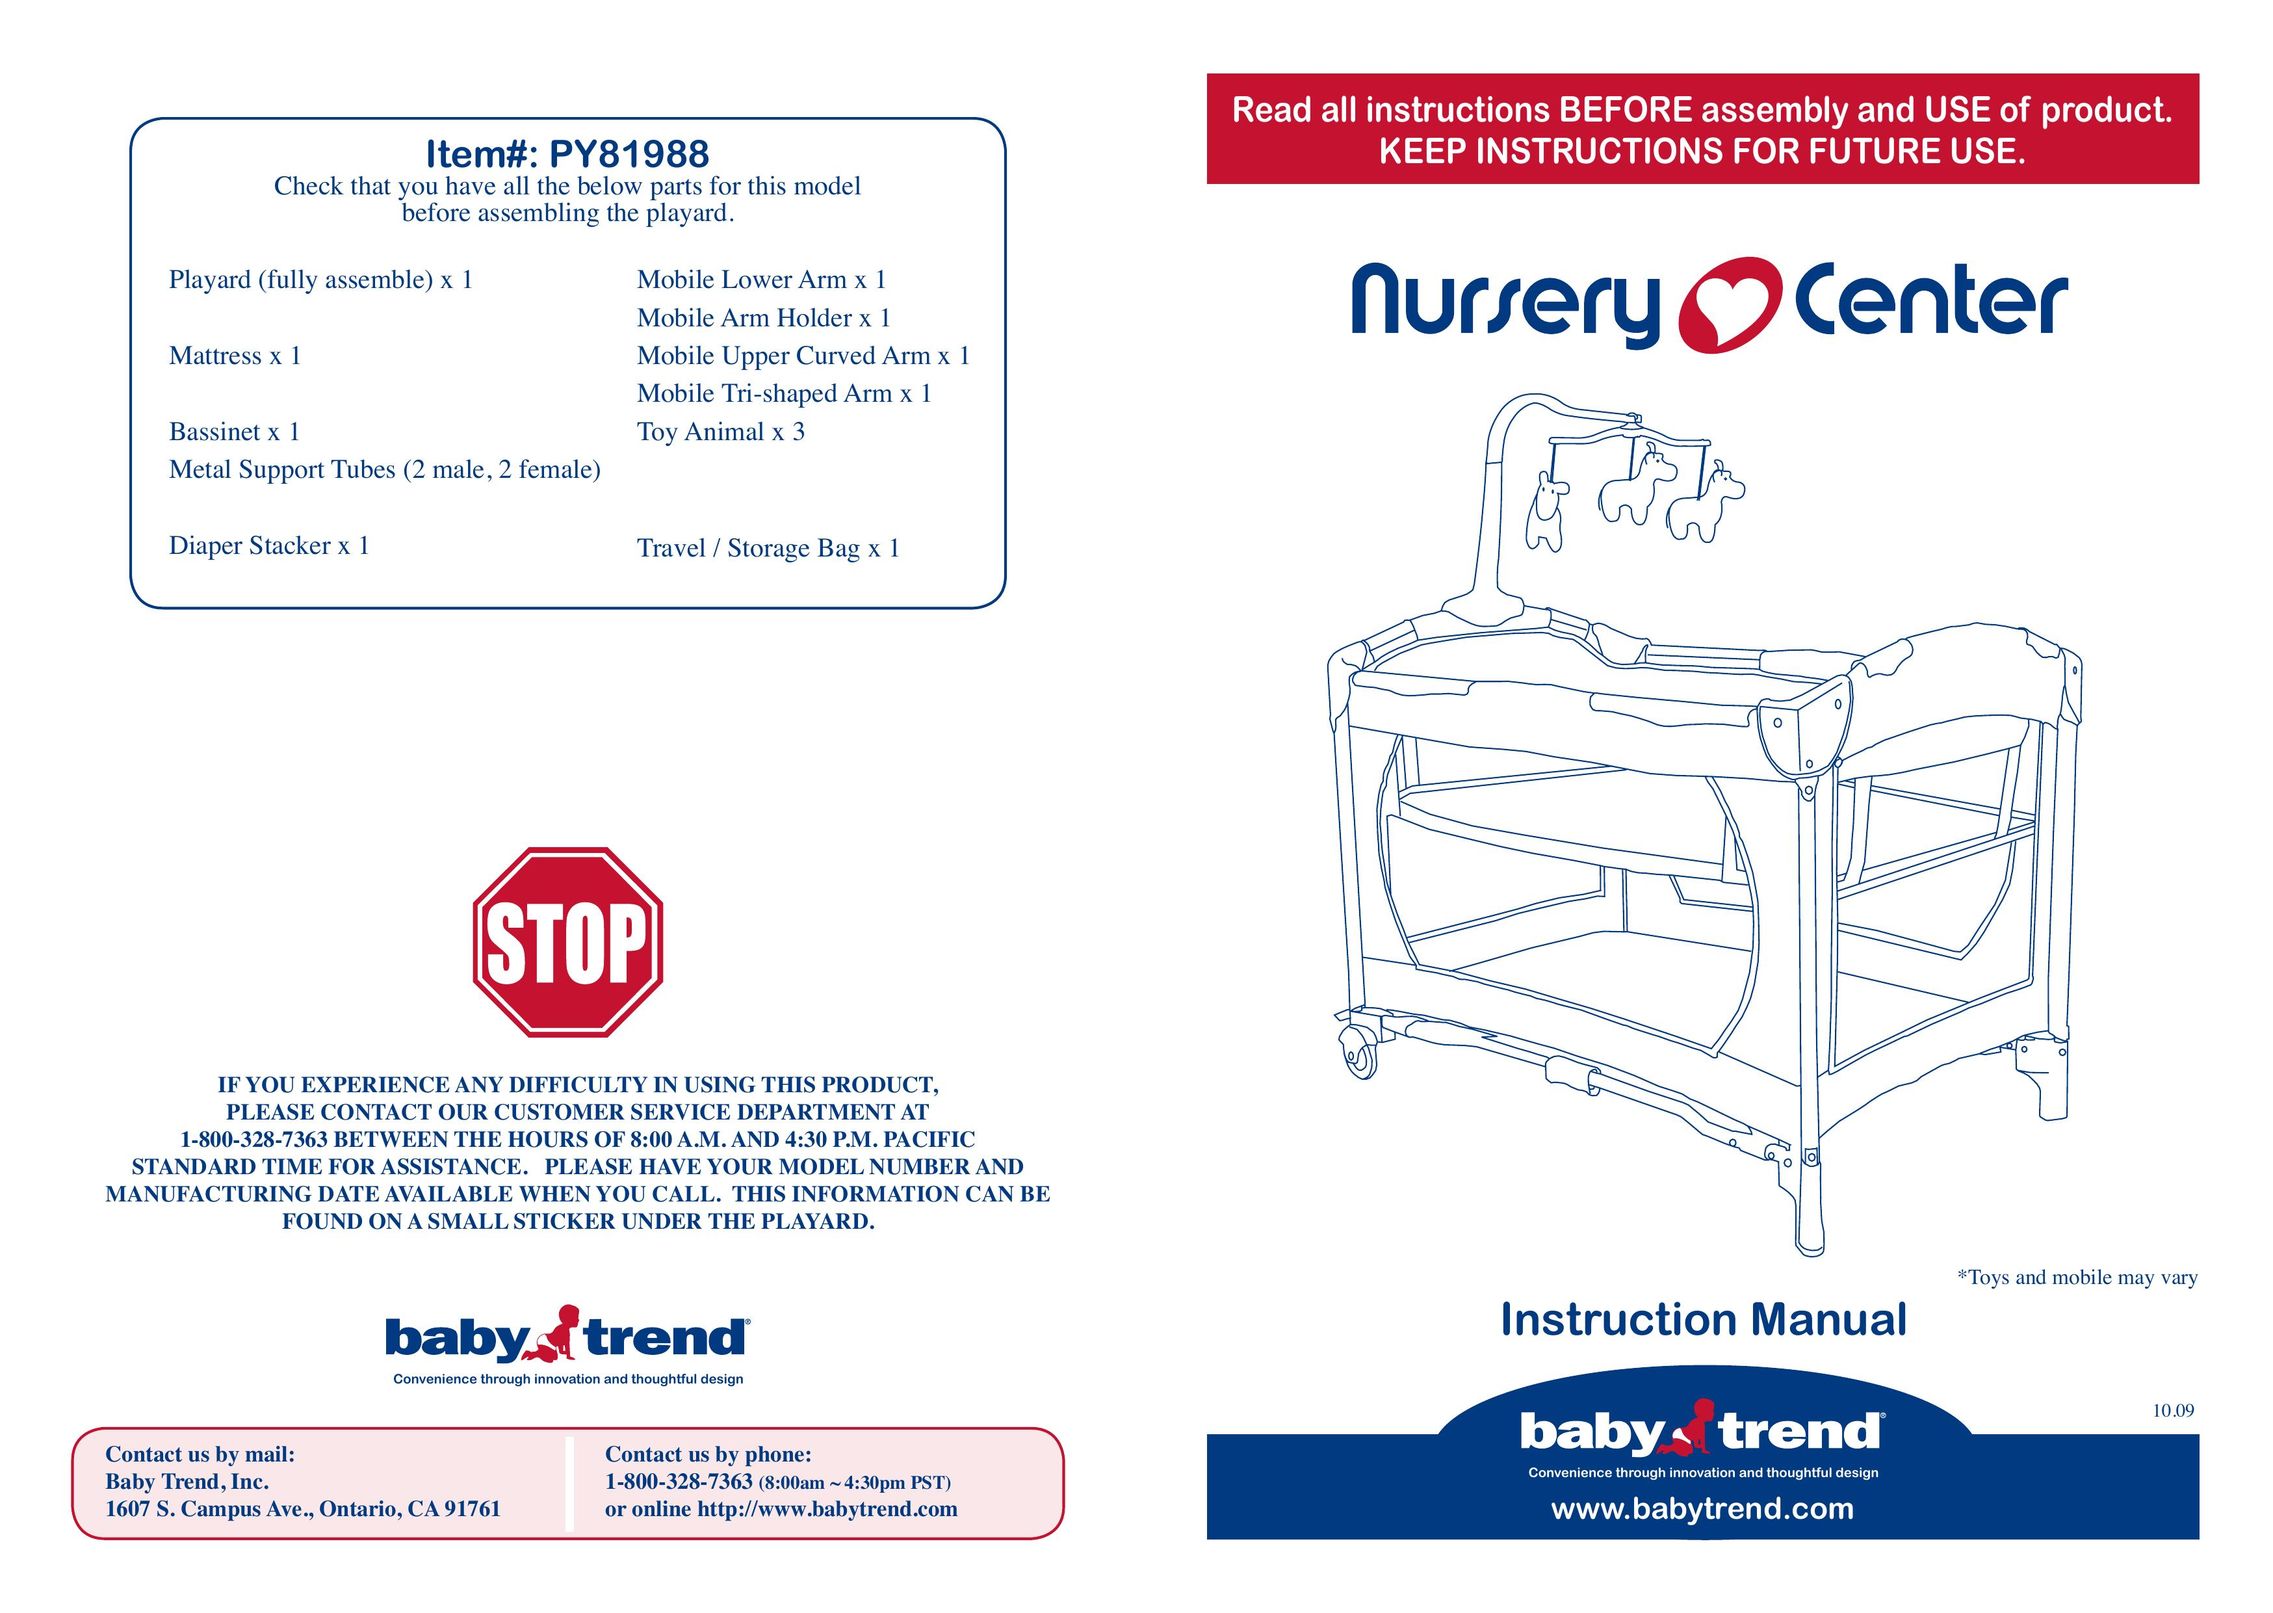 Baby Trend PY81988 Baby Furniture User Manual